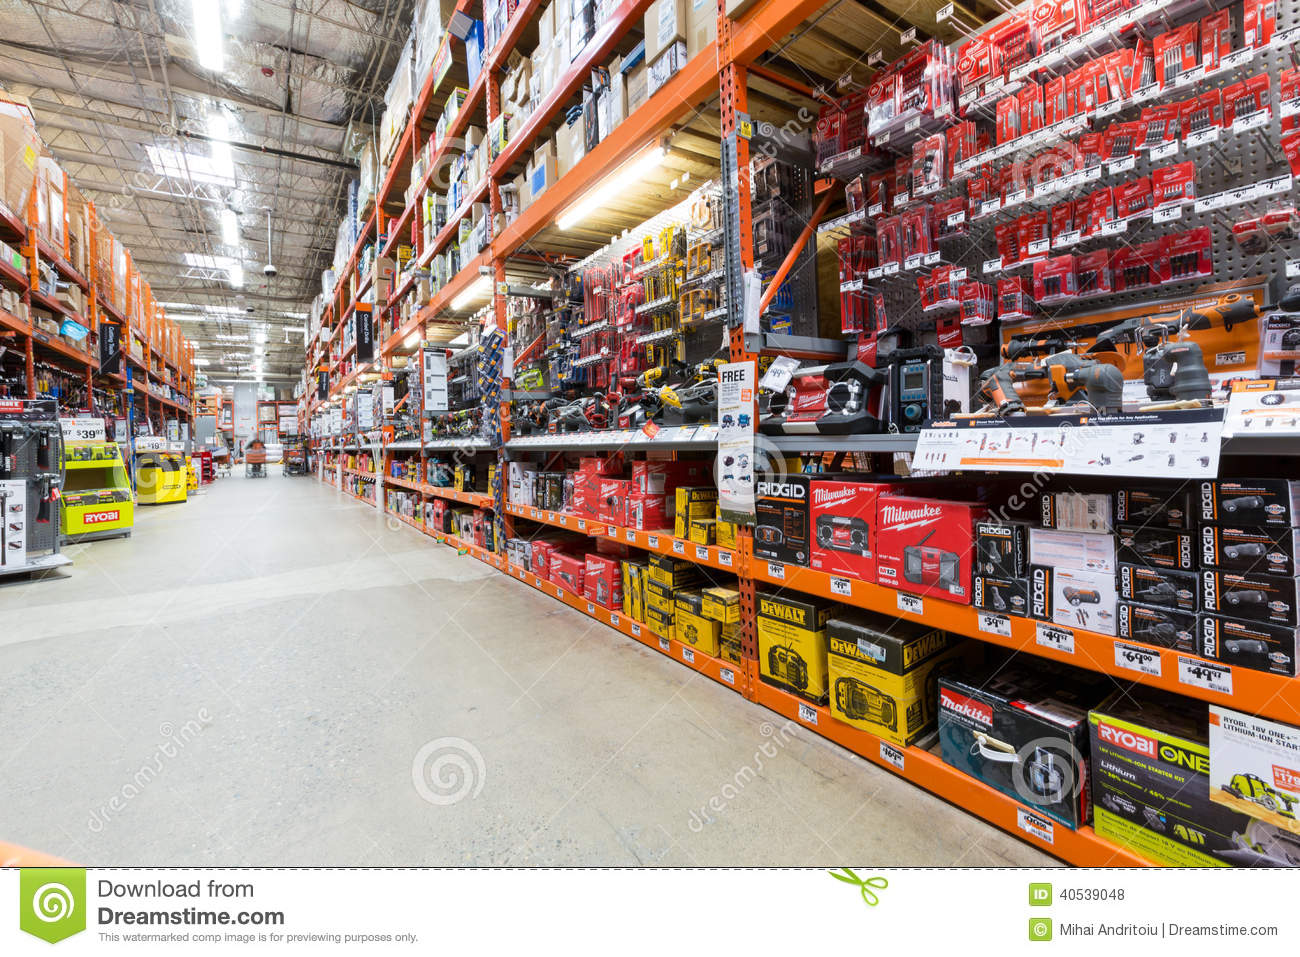 Power Tools Aisle In A Home Depot Hardware Store  The Home Depot Is